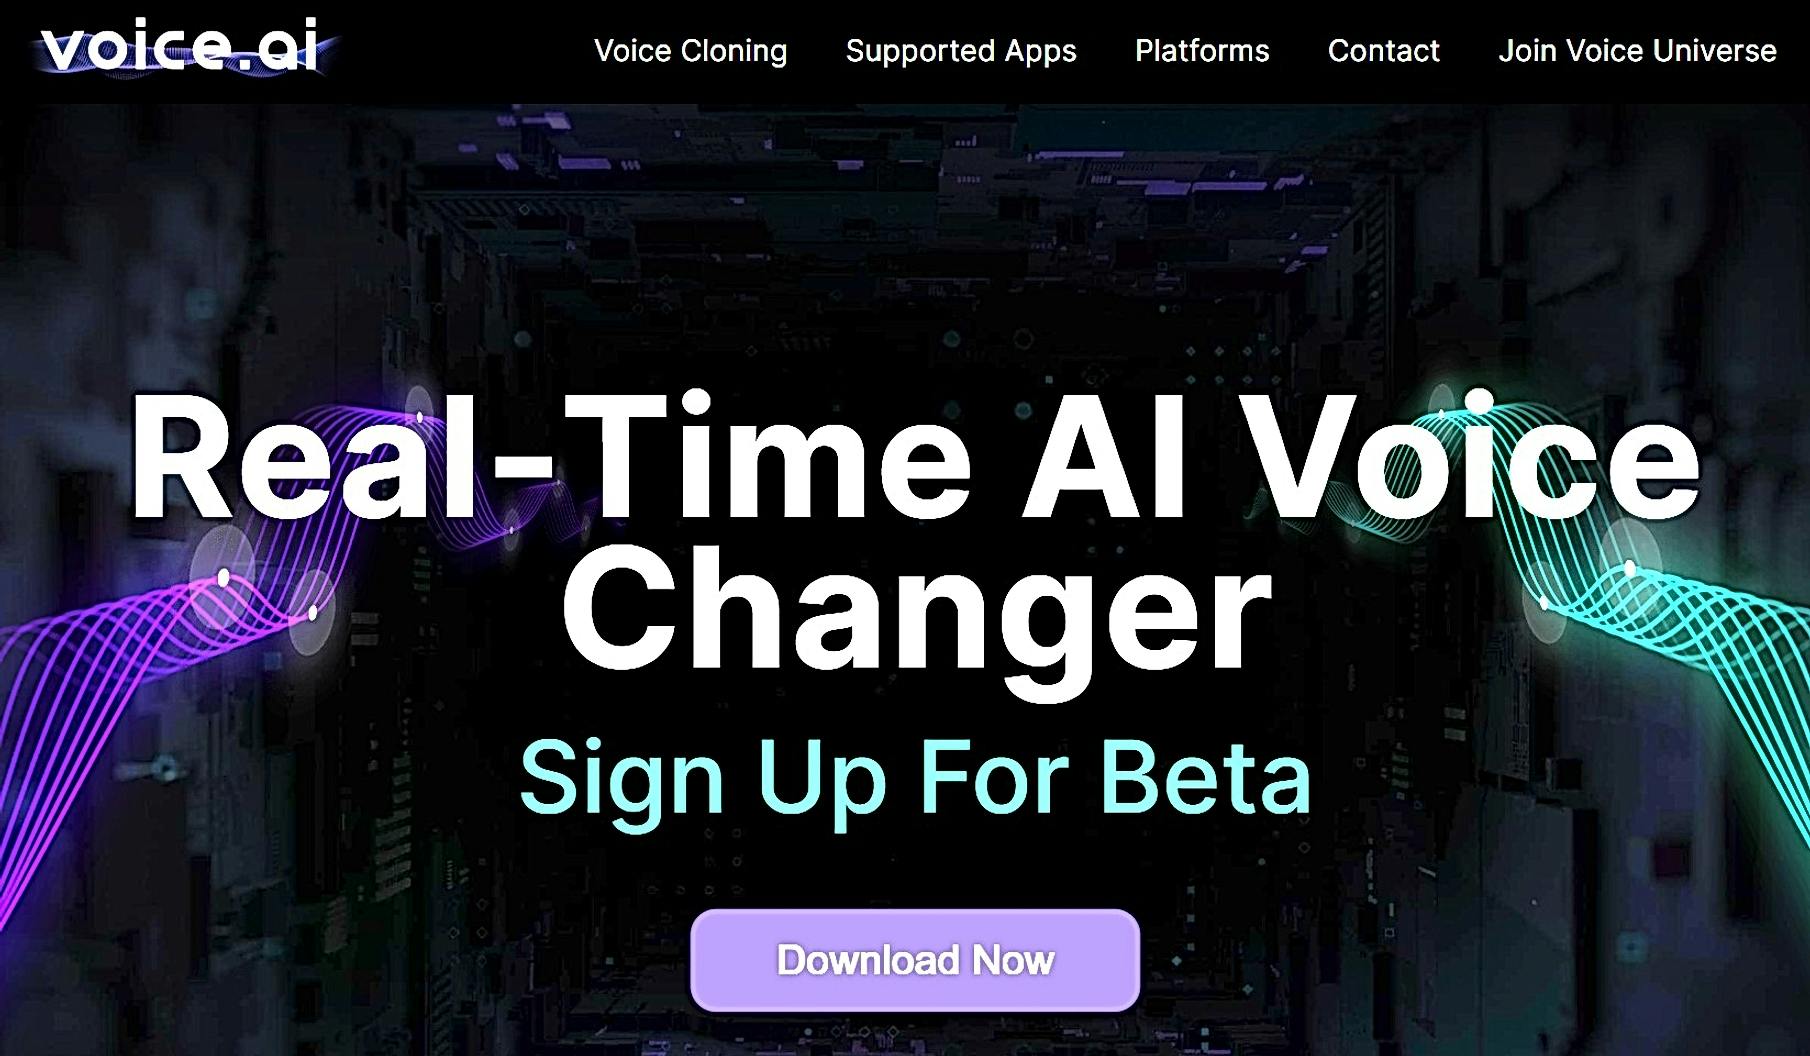 Voice AI featured